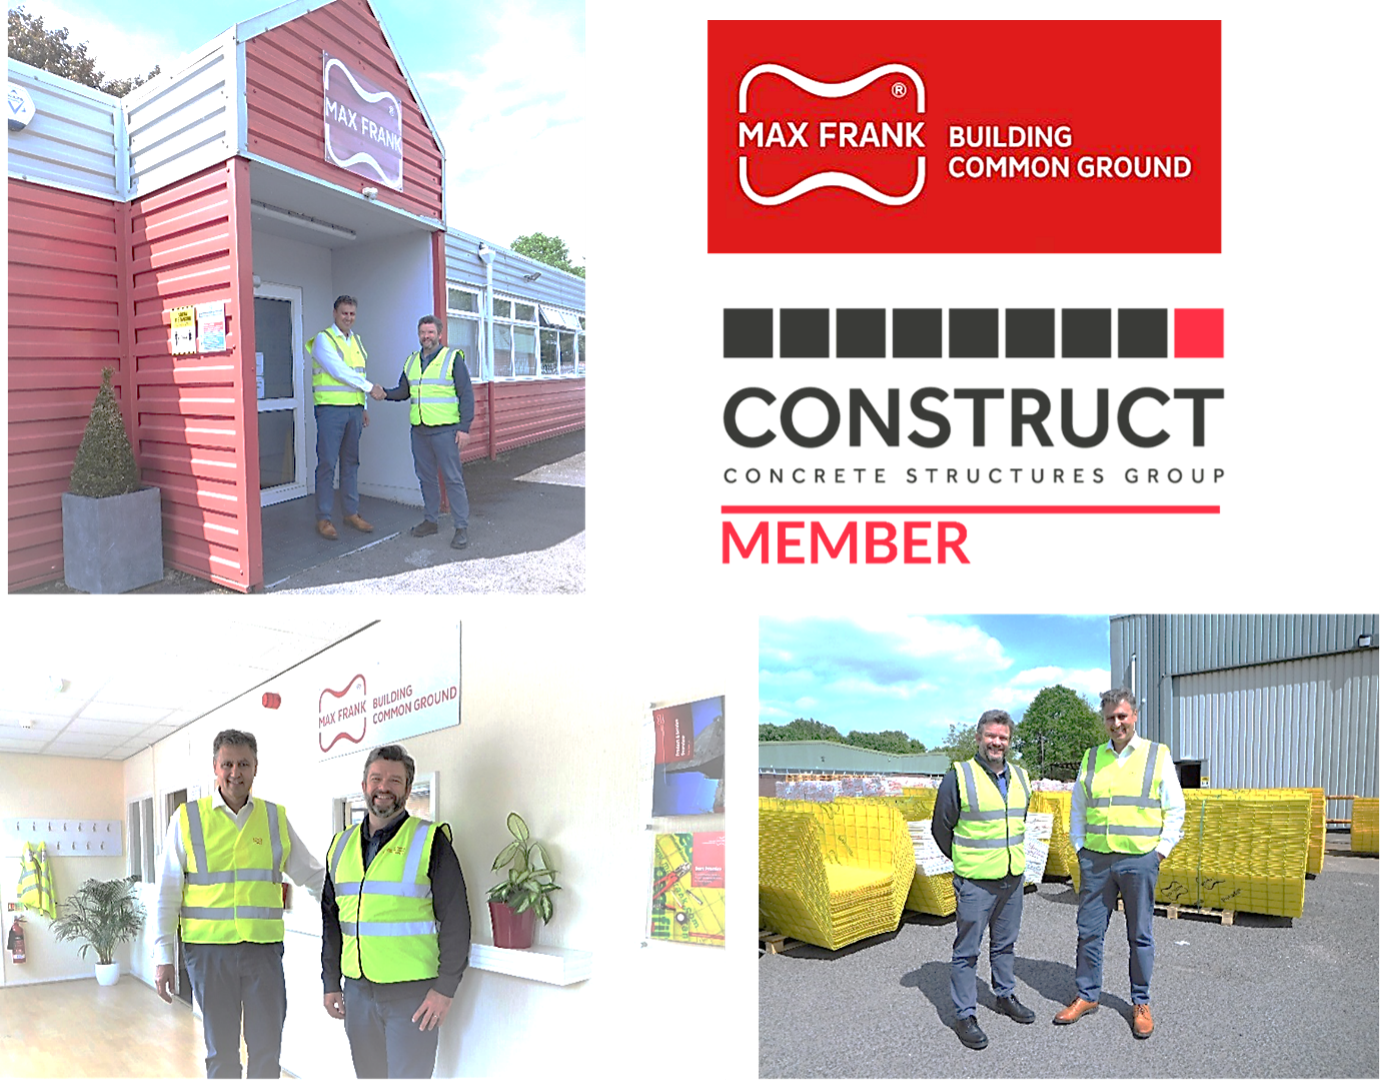 Ian Burnett, the General Manager for CONSTRUCT visits Max Frank